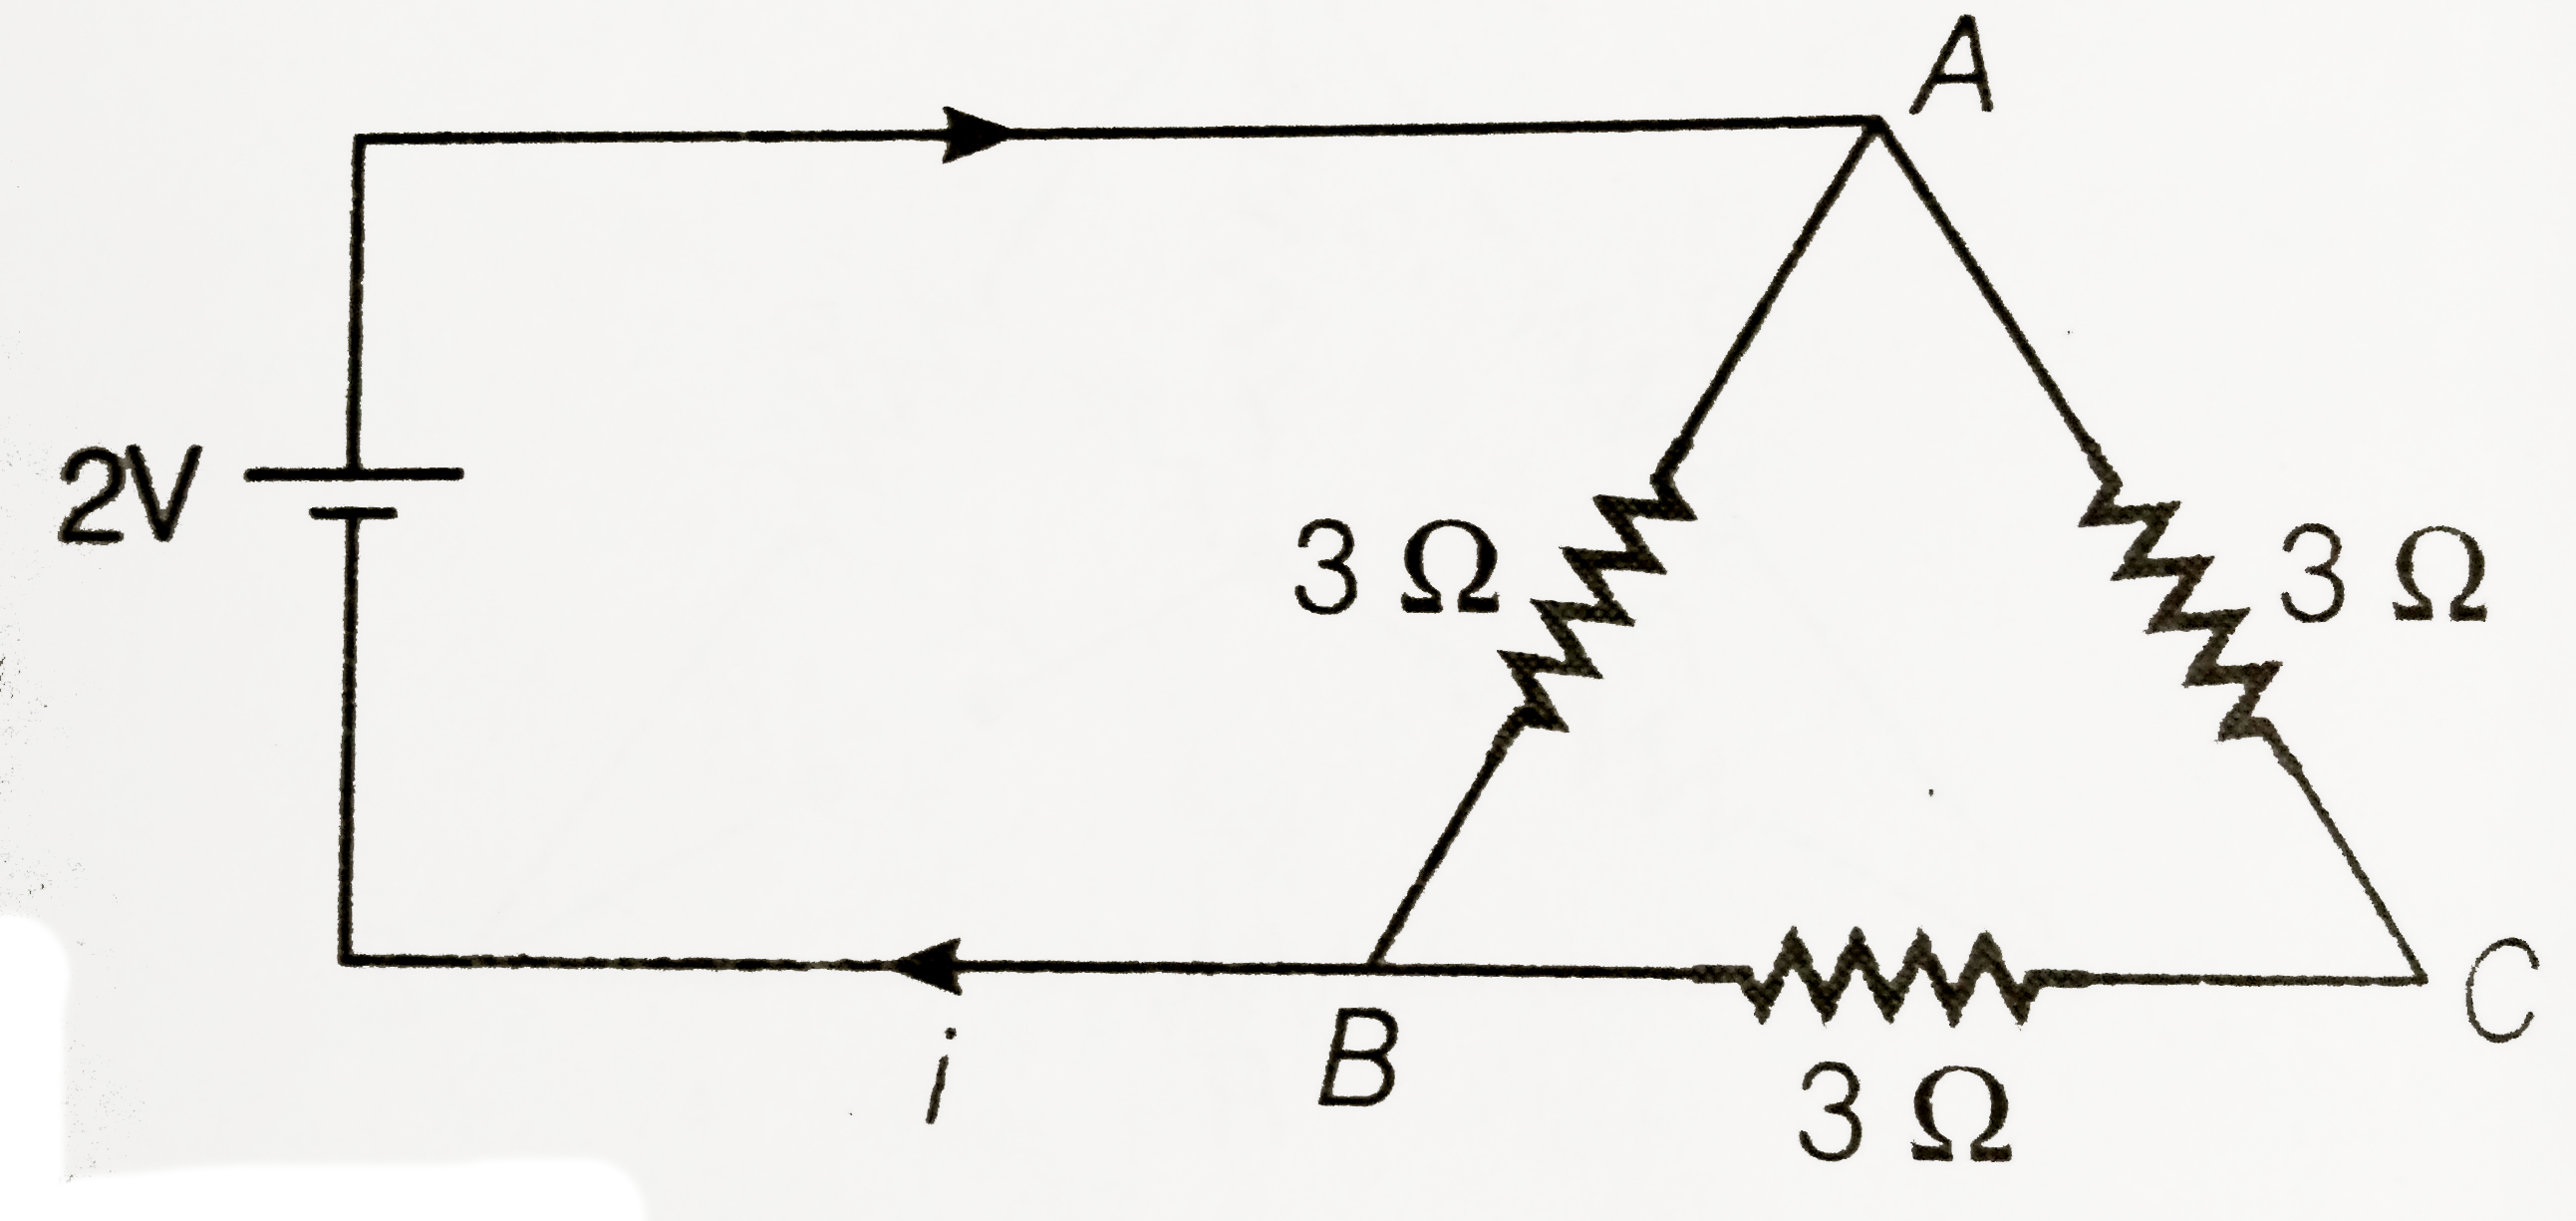 The current  in the following circuit is